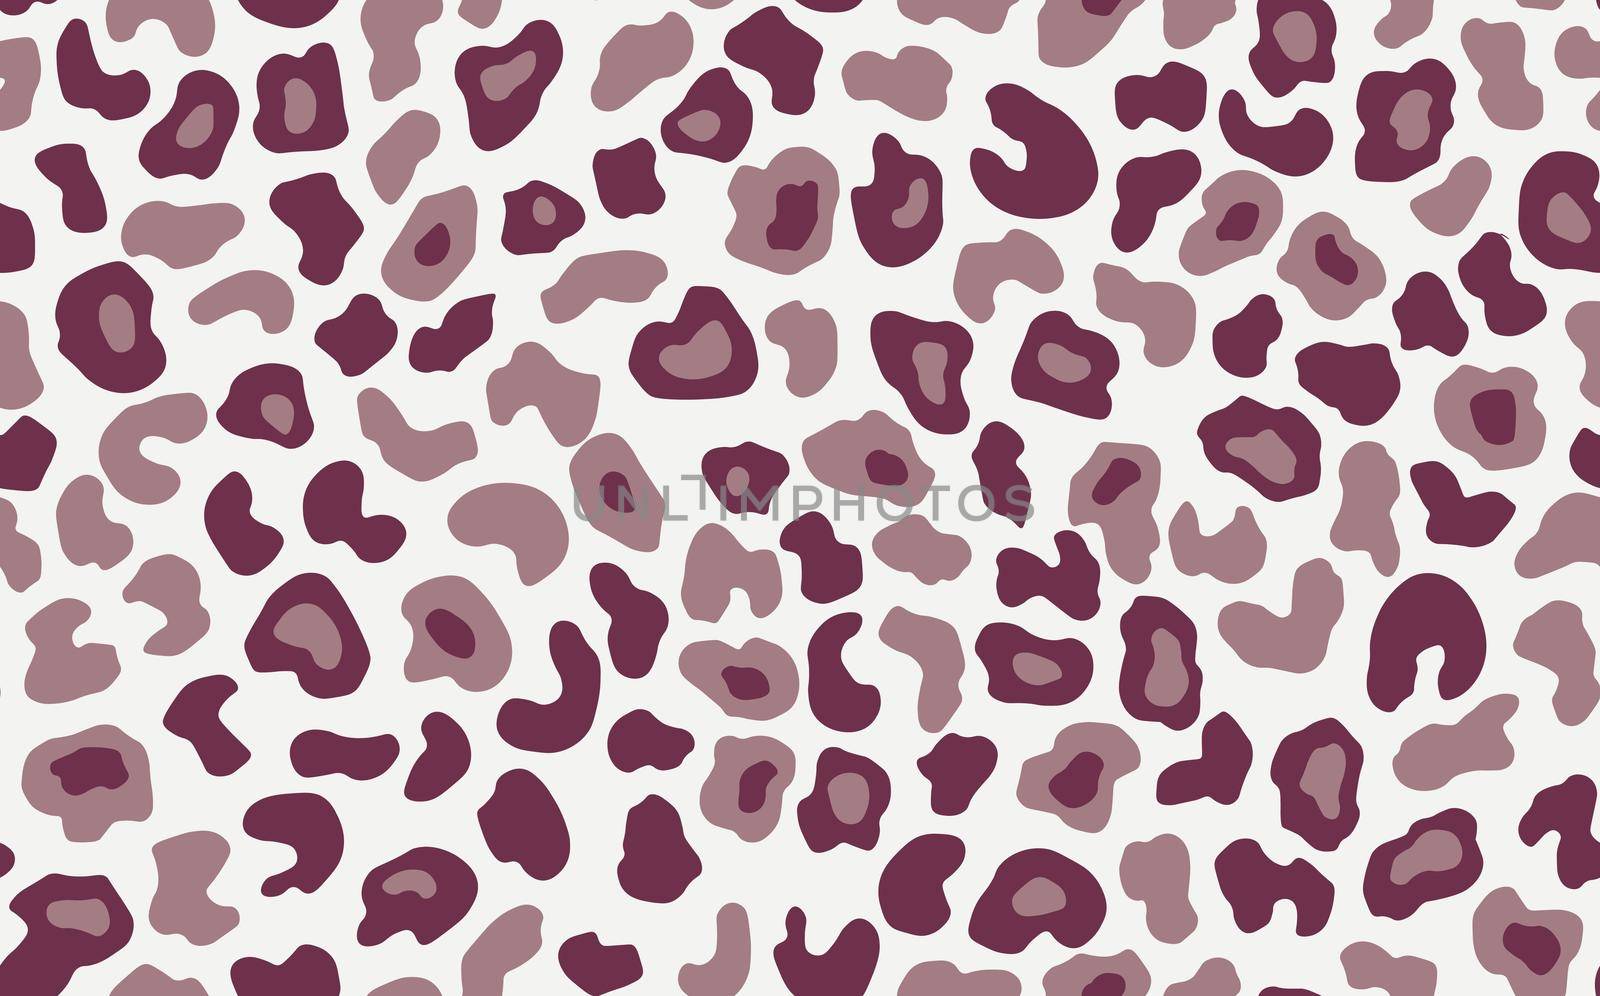 Abstract modern leopard seamless pattern. Animals trendy background. Colorful decorative vector stock illustration for print, card, postcard, fabric, textile. Modern ornament of stylized skin.